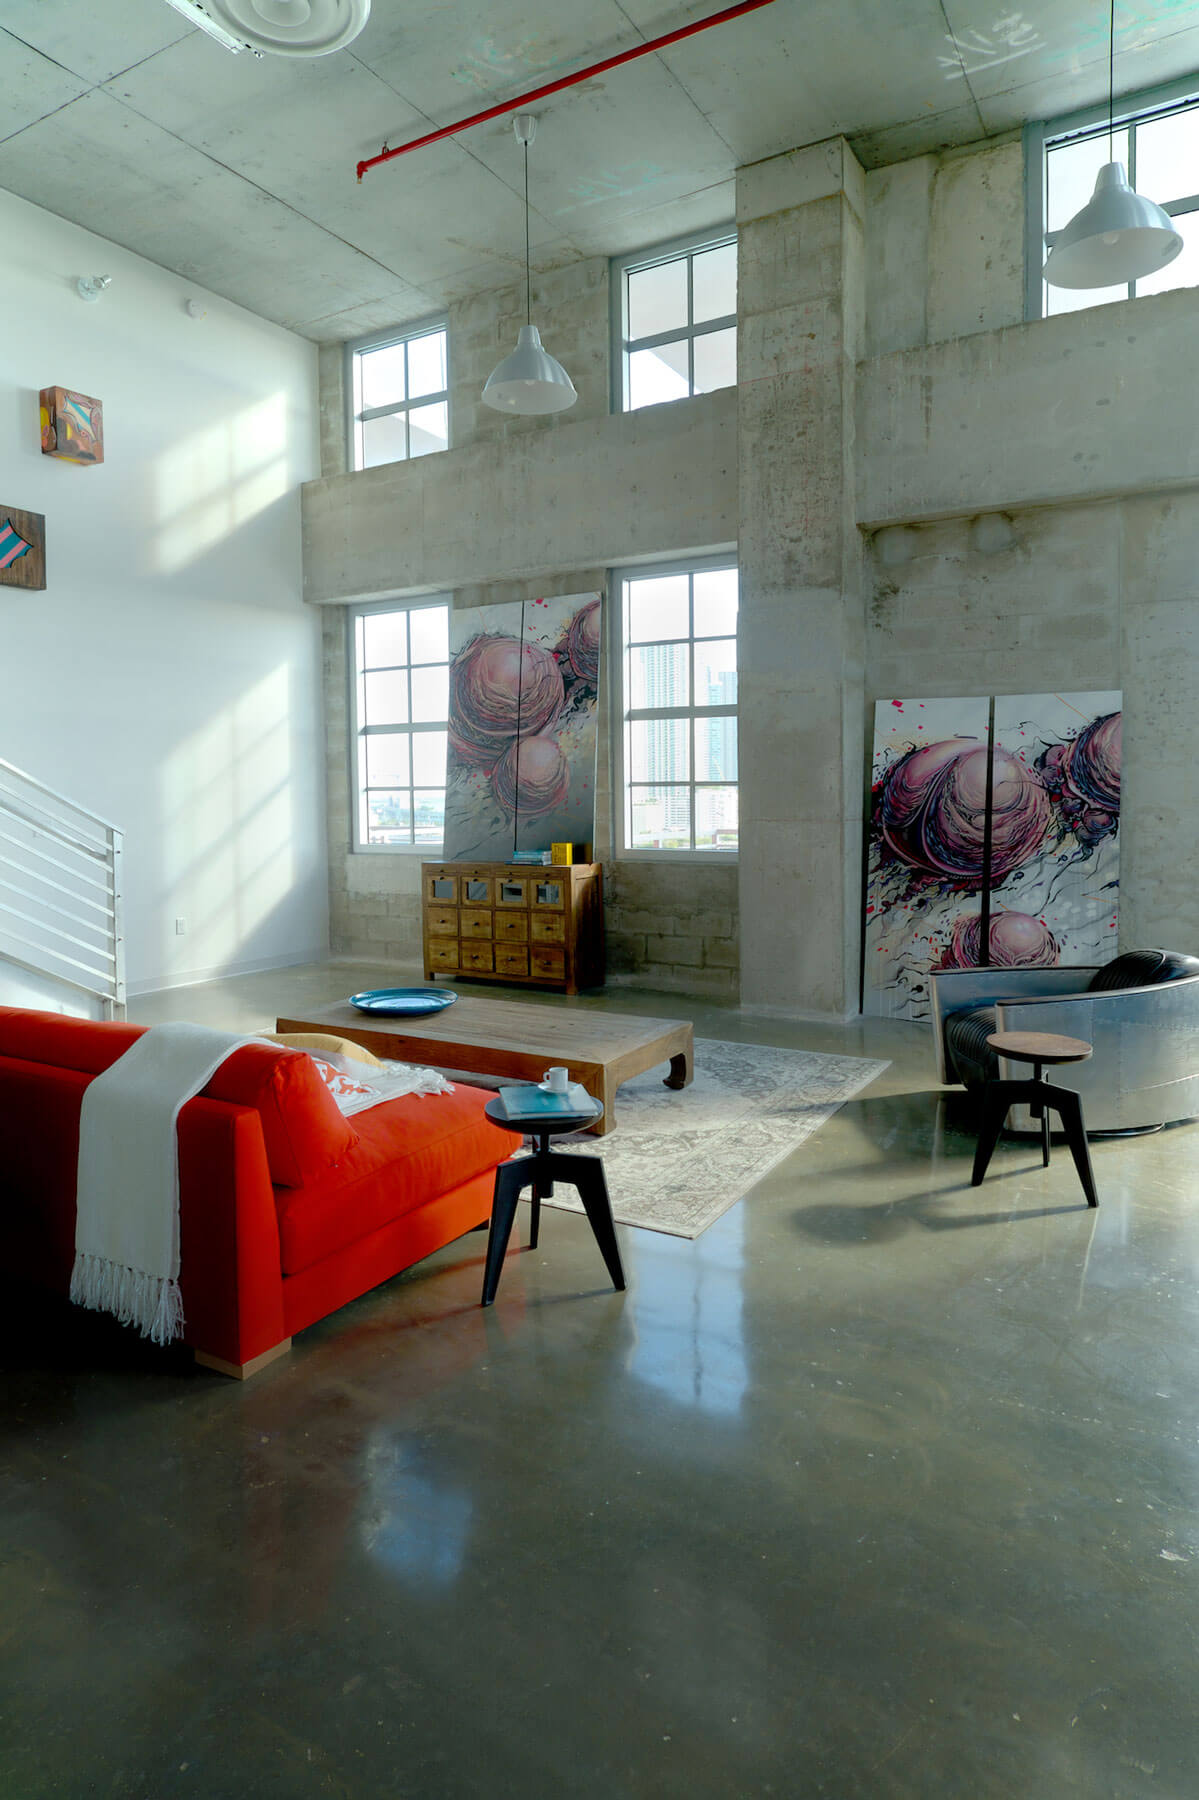 Large abstract paintings resting against the wall